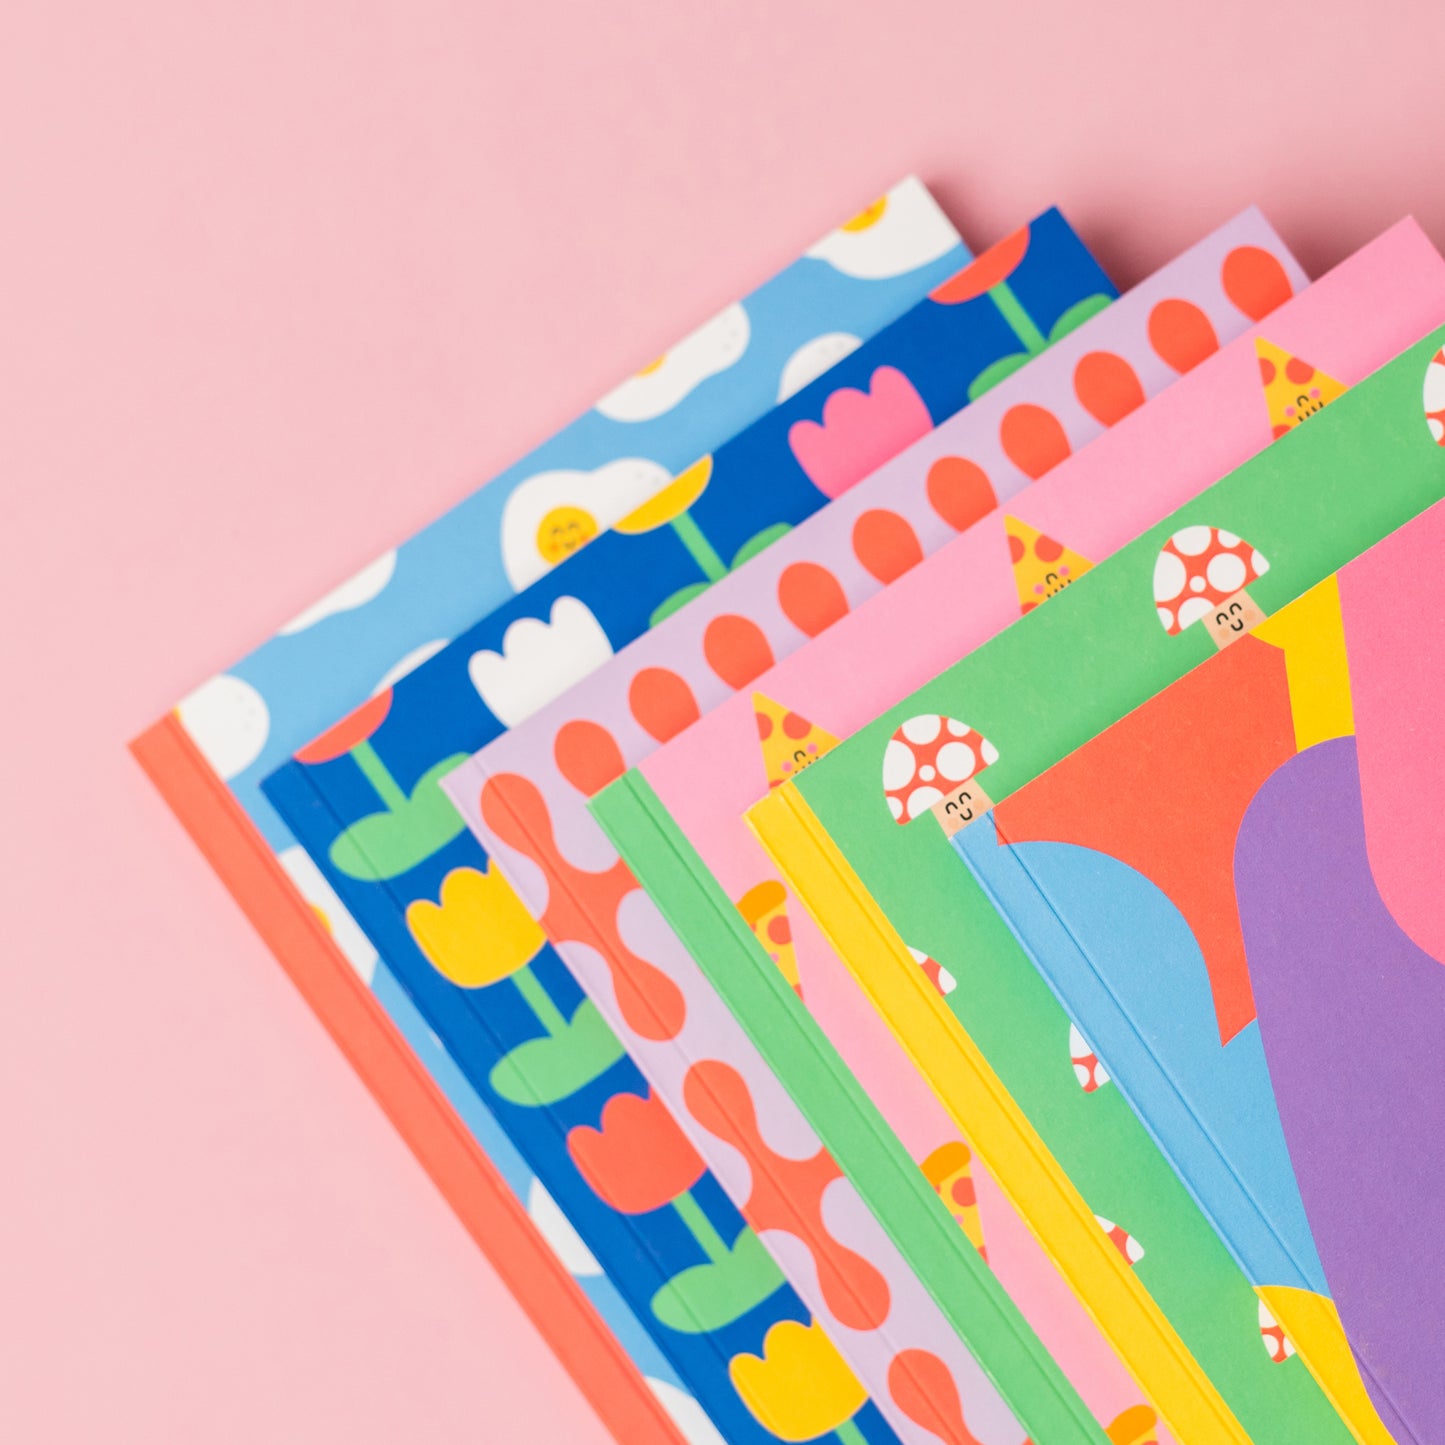 A set of colorful notebooks on a pink background